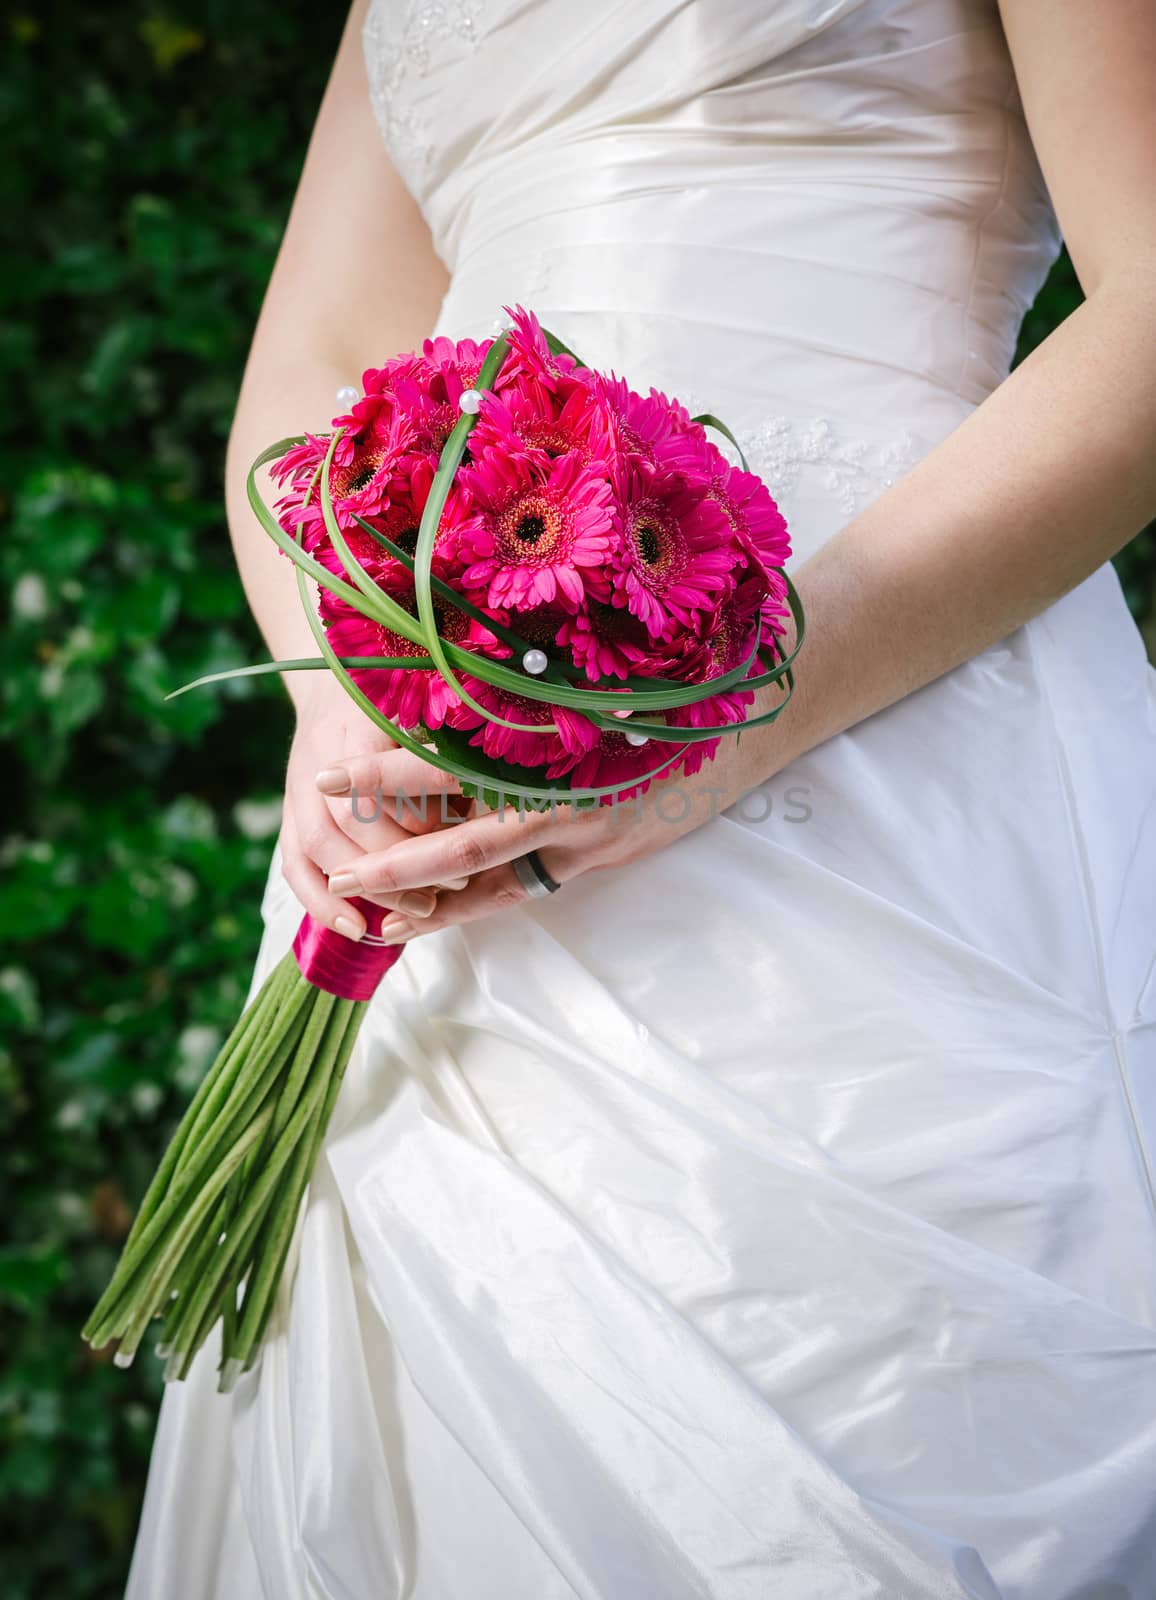 Photo of a bride in a white dress holding flowers.